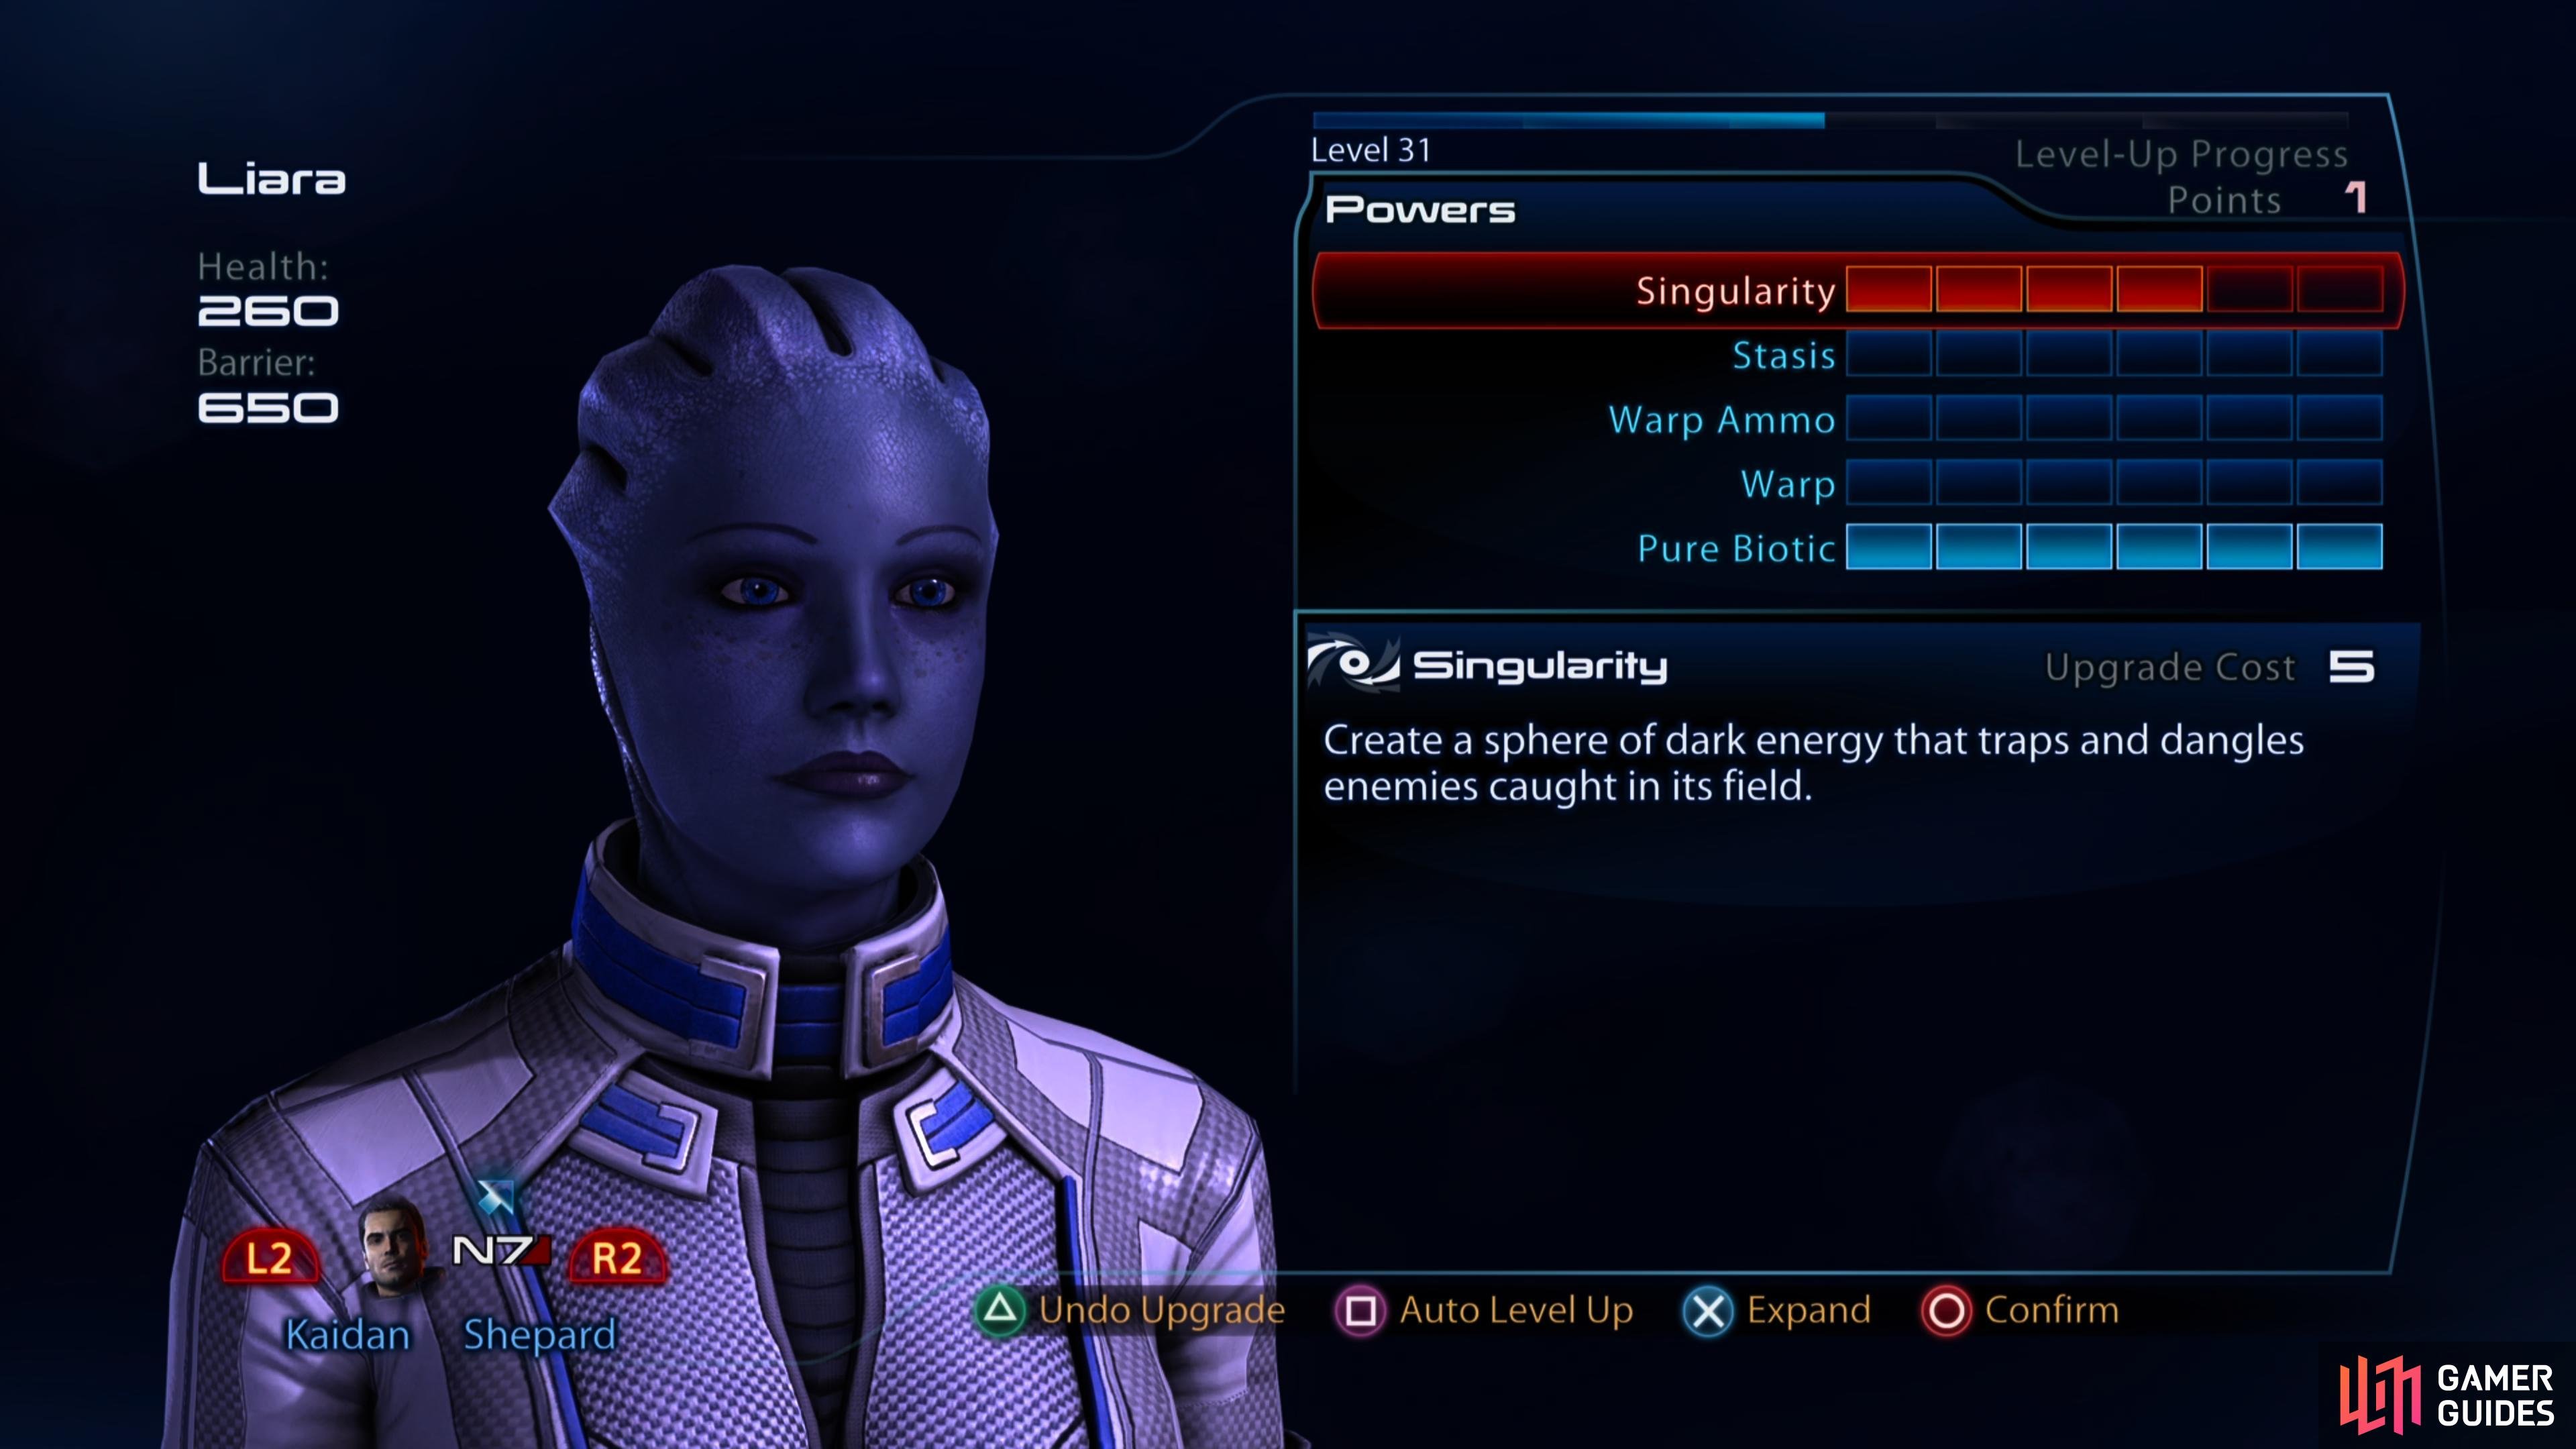 Assign her powers - it's hard to go wrong with investing points into Singularity and Pure Biotic,